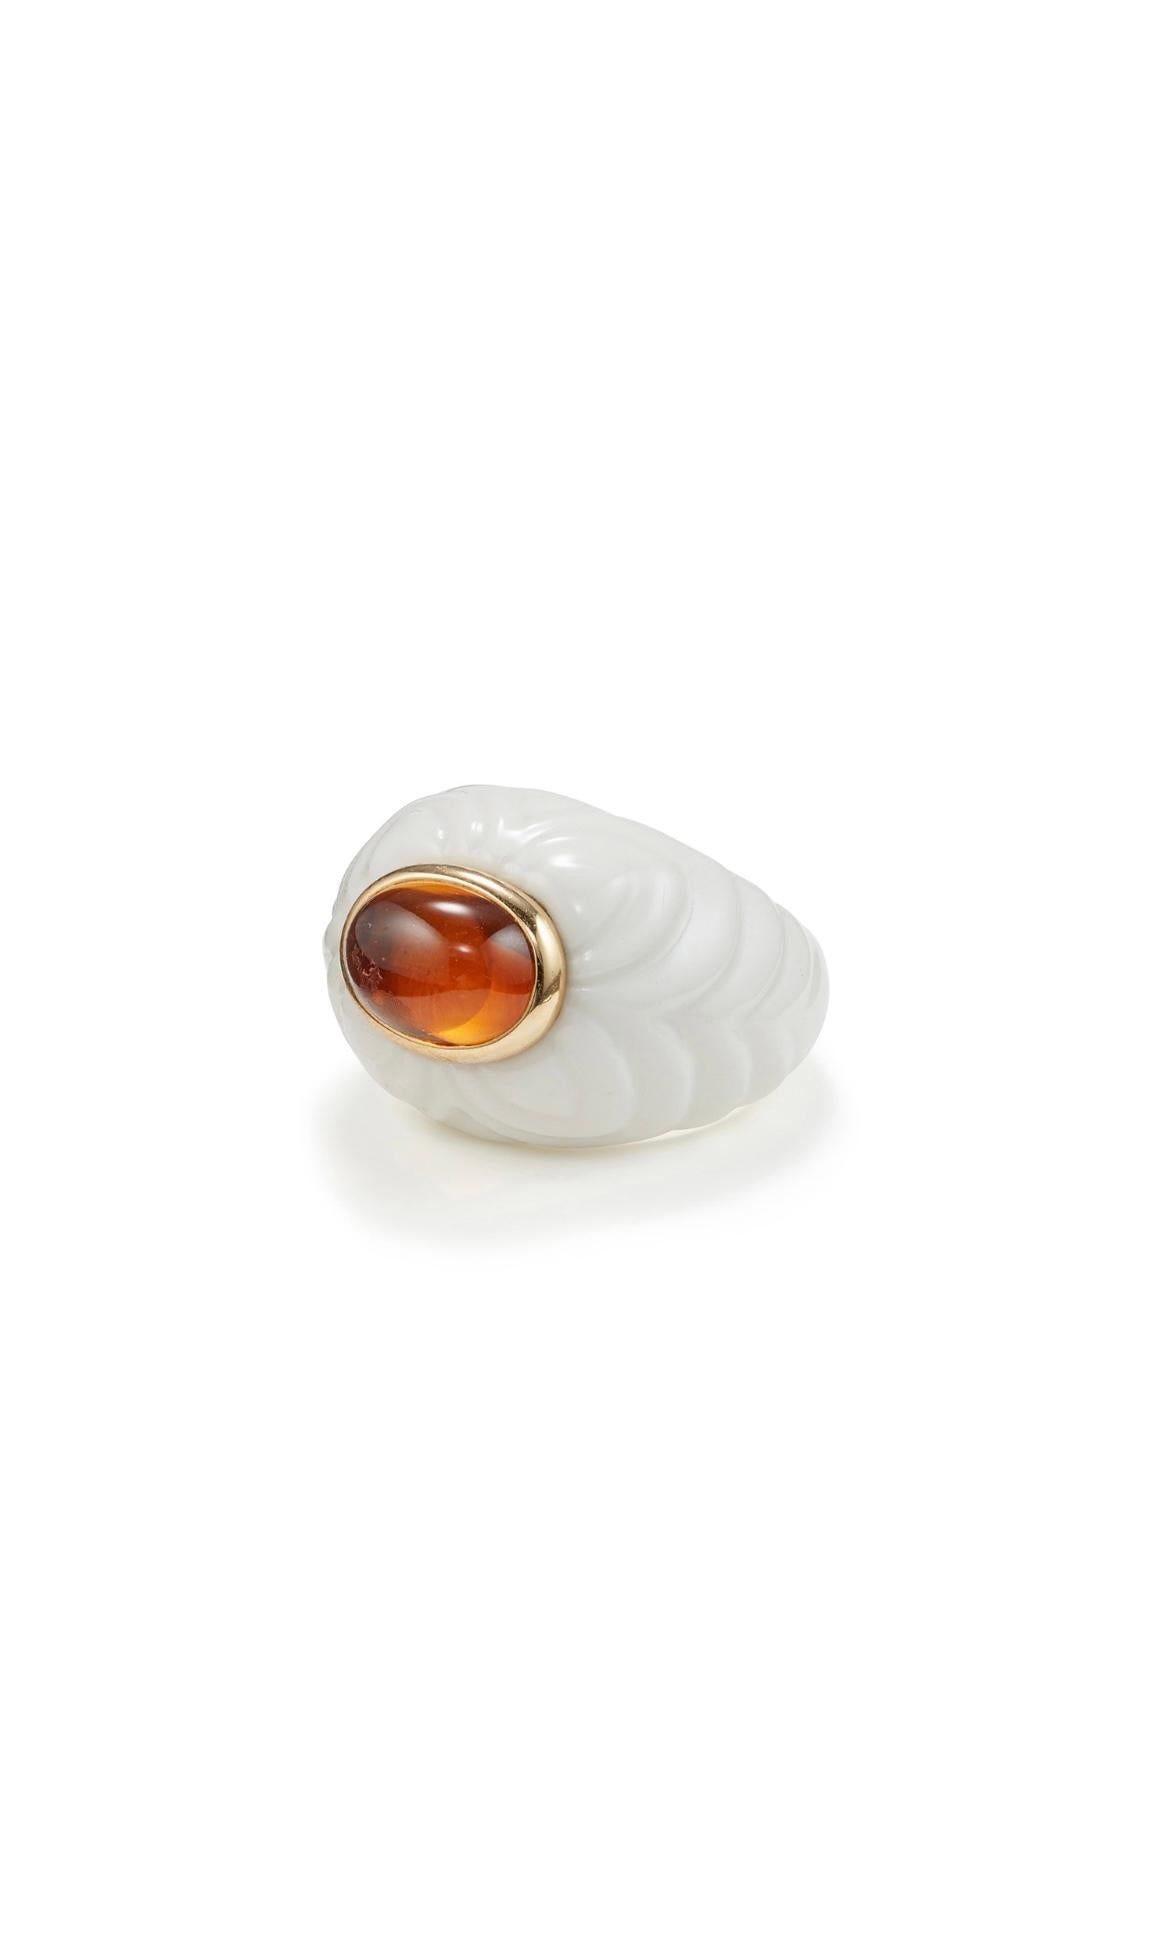 A beautiful ring in 18kt yellow gold and white porcelain, set with one natural Citrine Cabochon cut. Signed Bulgari, from the “Chandra” collection, Made in Italy, circa 1990.
Designed as a series of part textured porcelain spheres depicting a